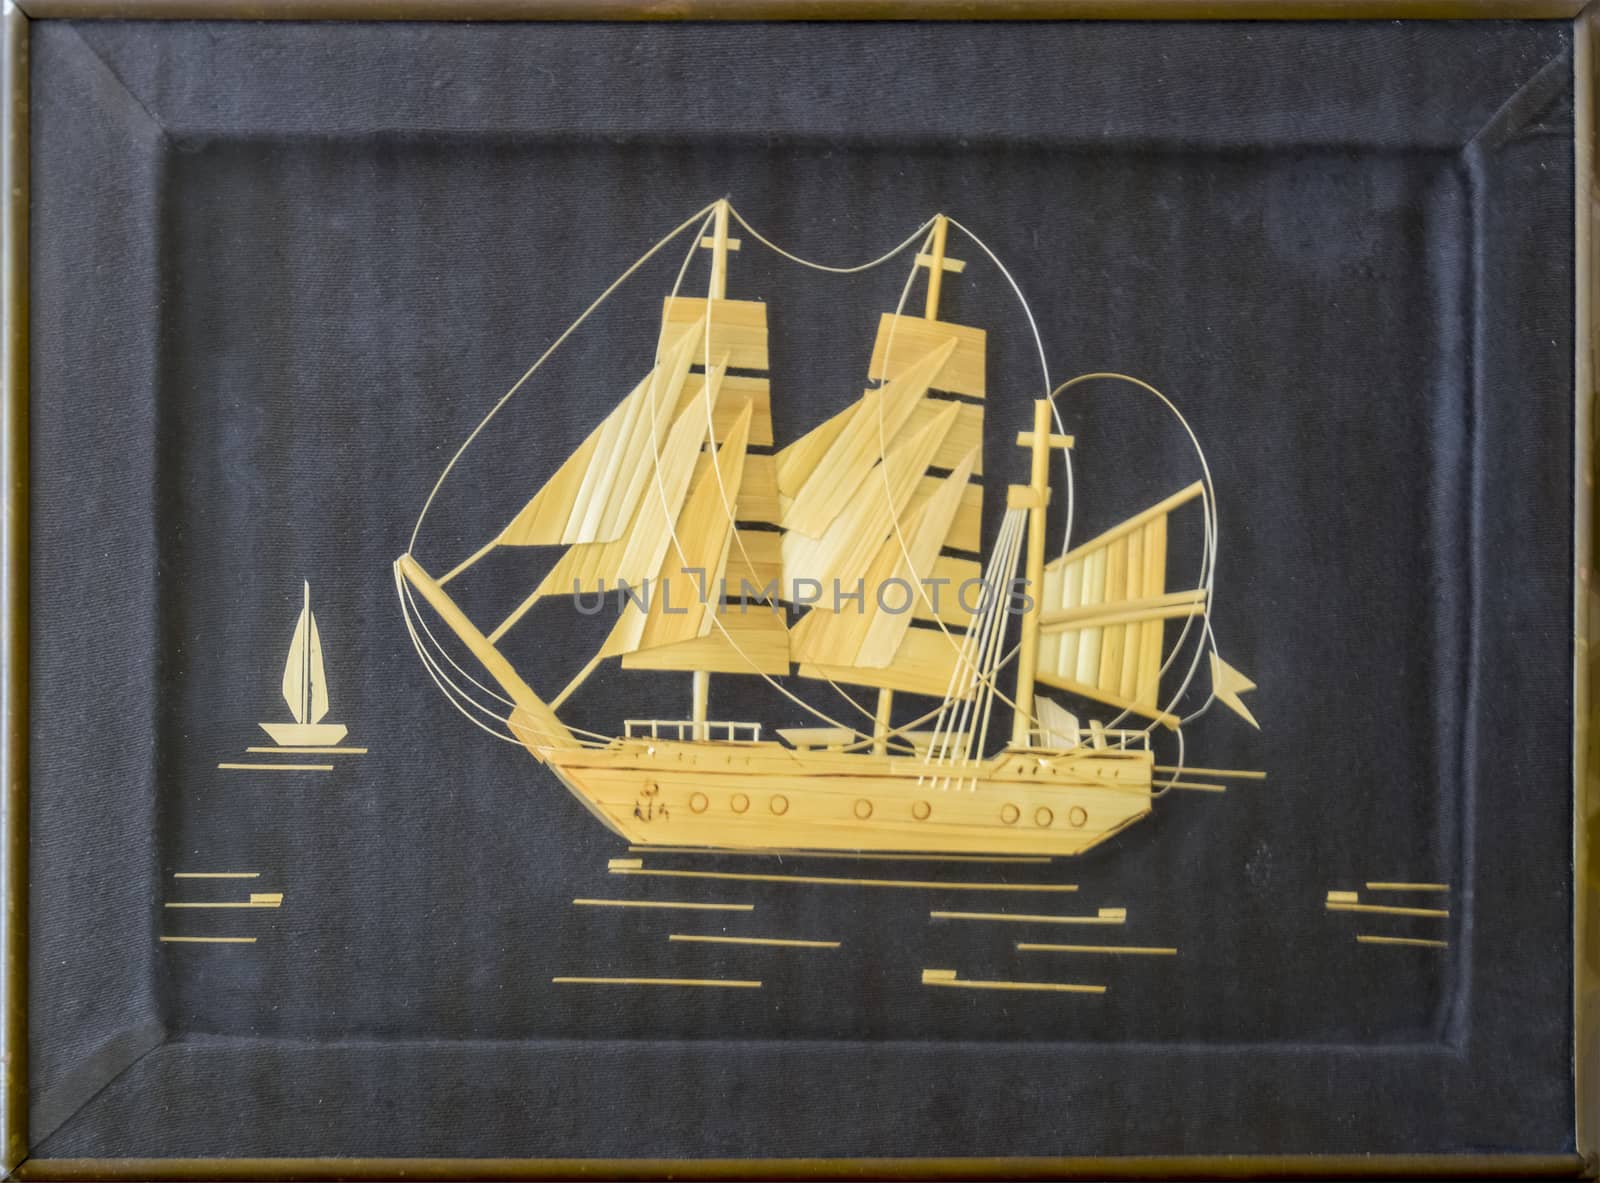 A pattern of wood chips. Sailing ship at sea. Black background. Craft ship sailing from wood chips.